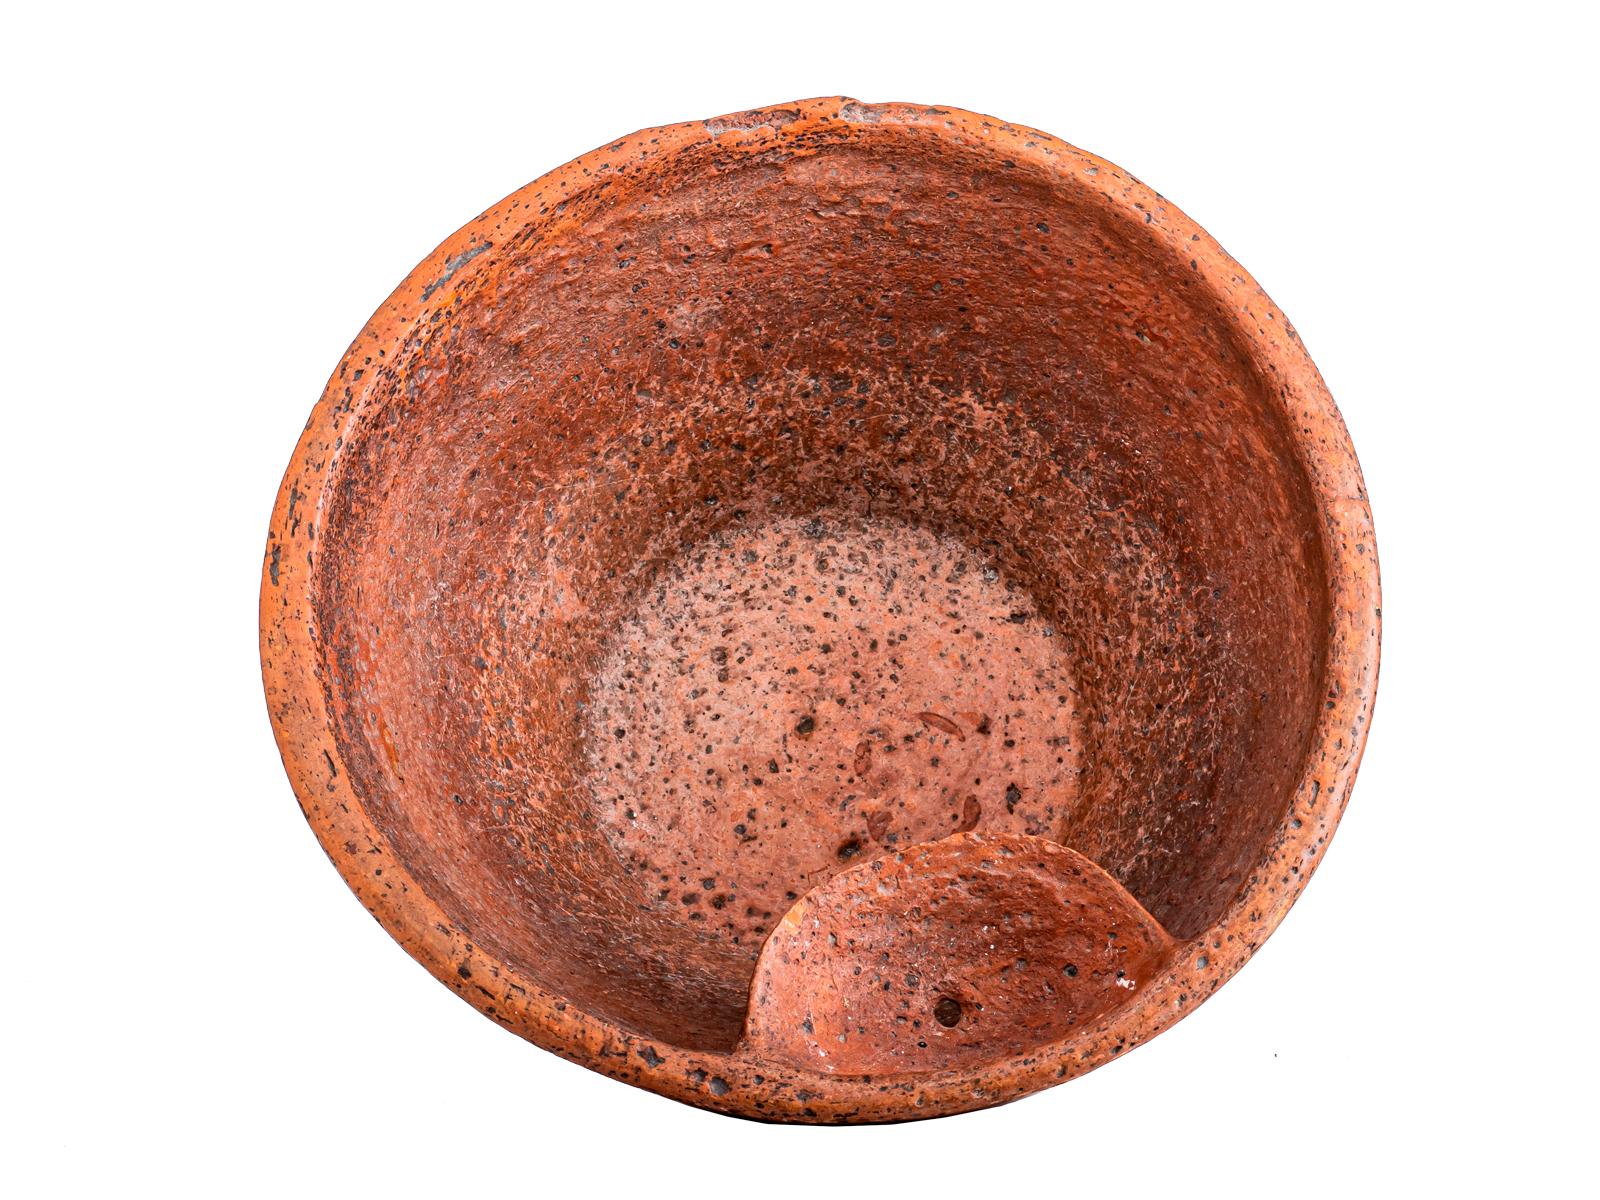 Charming and at the same time rural decorative early 19th century French terracotta was basin.
Looking as it has been around for a while, maybe displayed as an object in a French movie. It has that rustic, rural feeling, yet sophisticated. Truly